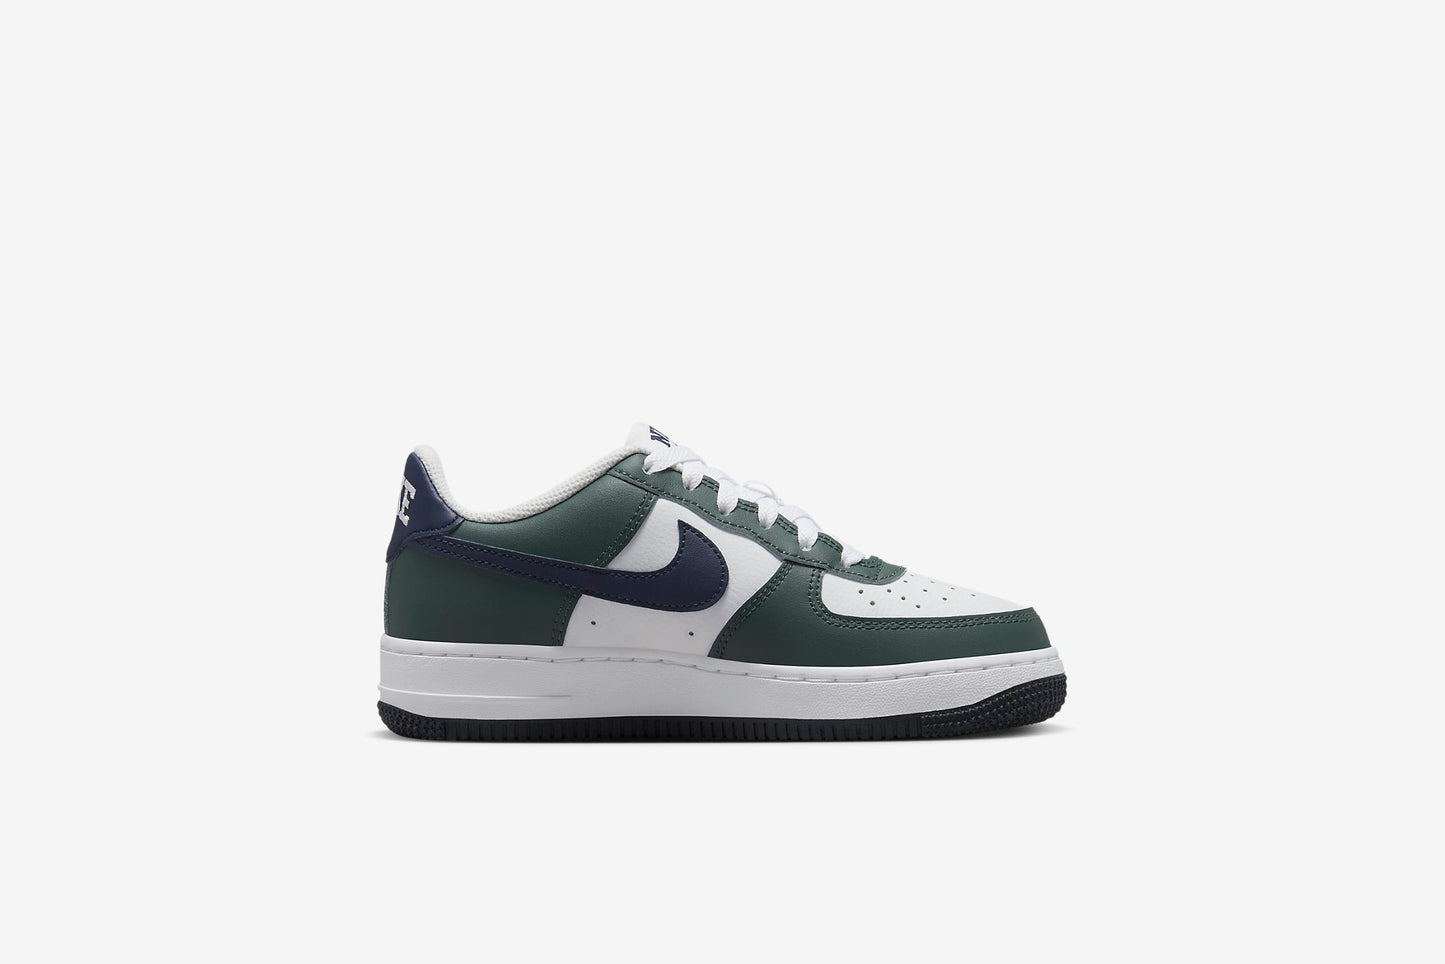 Nike "Air Force 1" GS - Vintage Green / Obsidian White